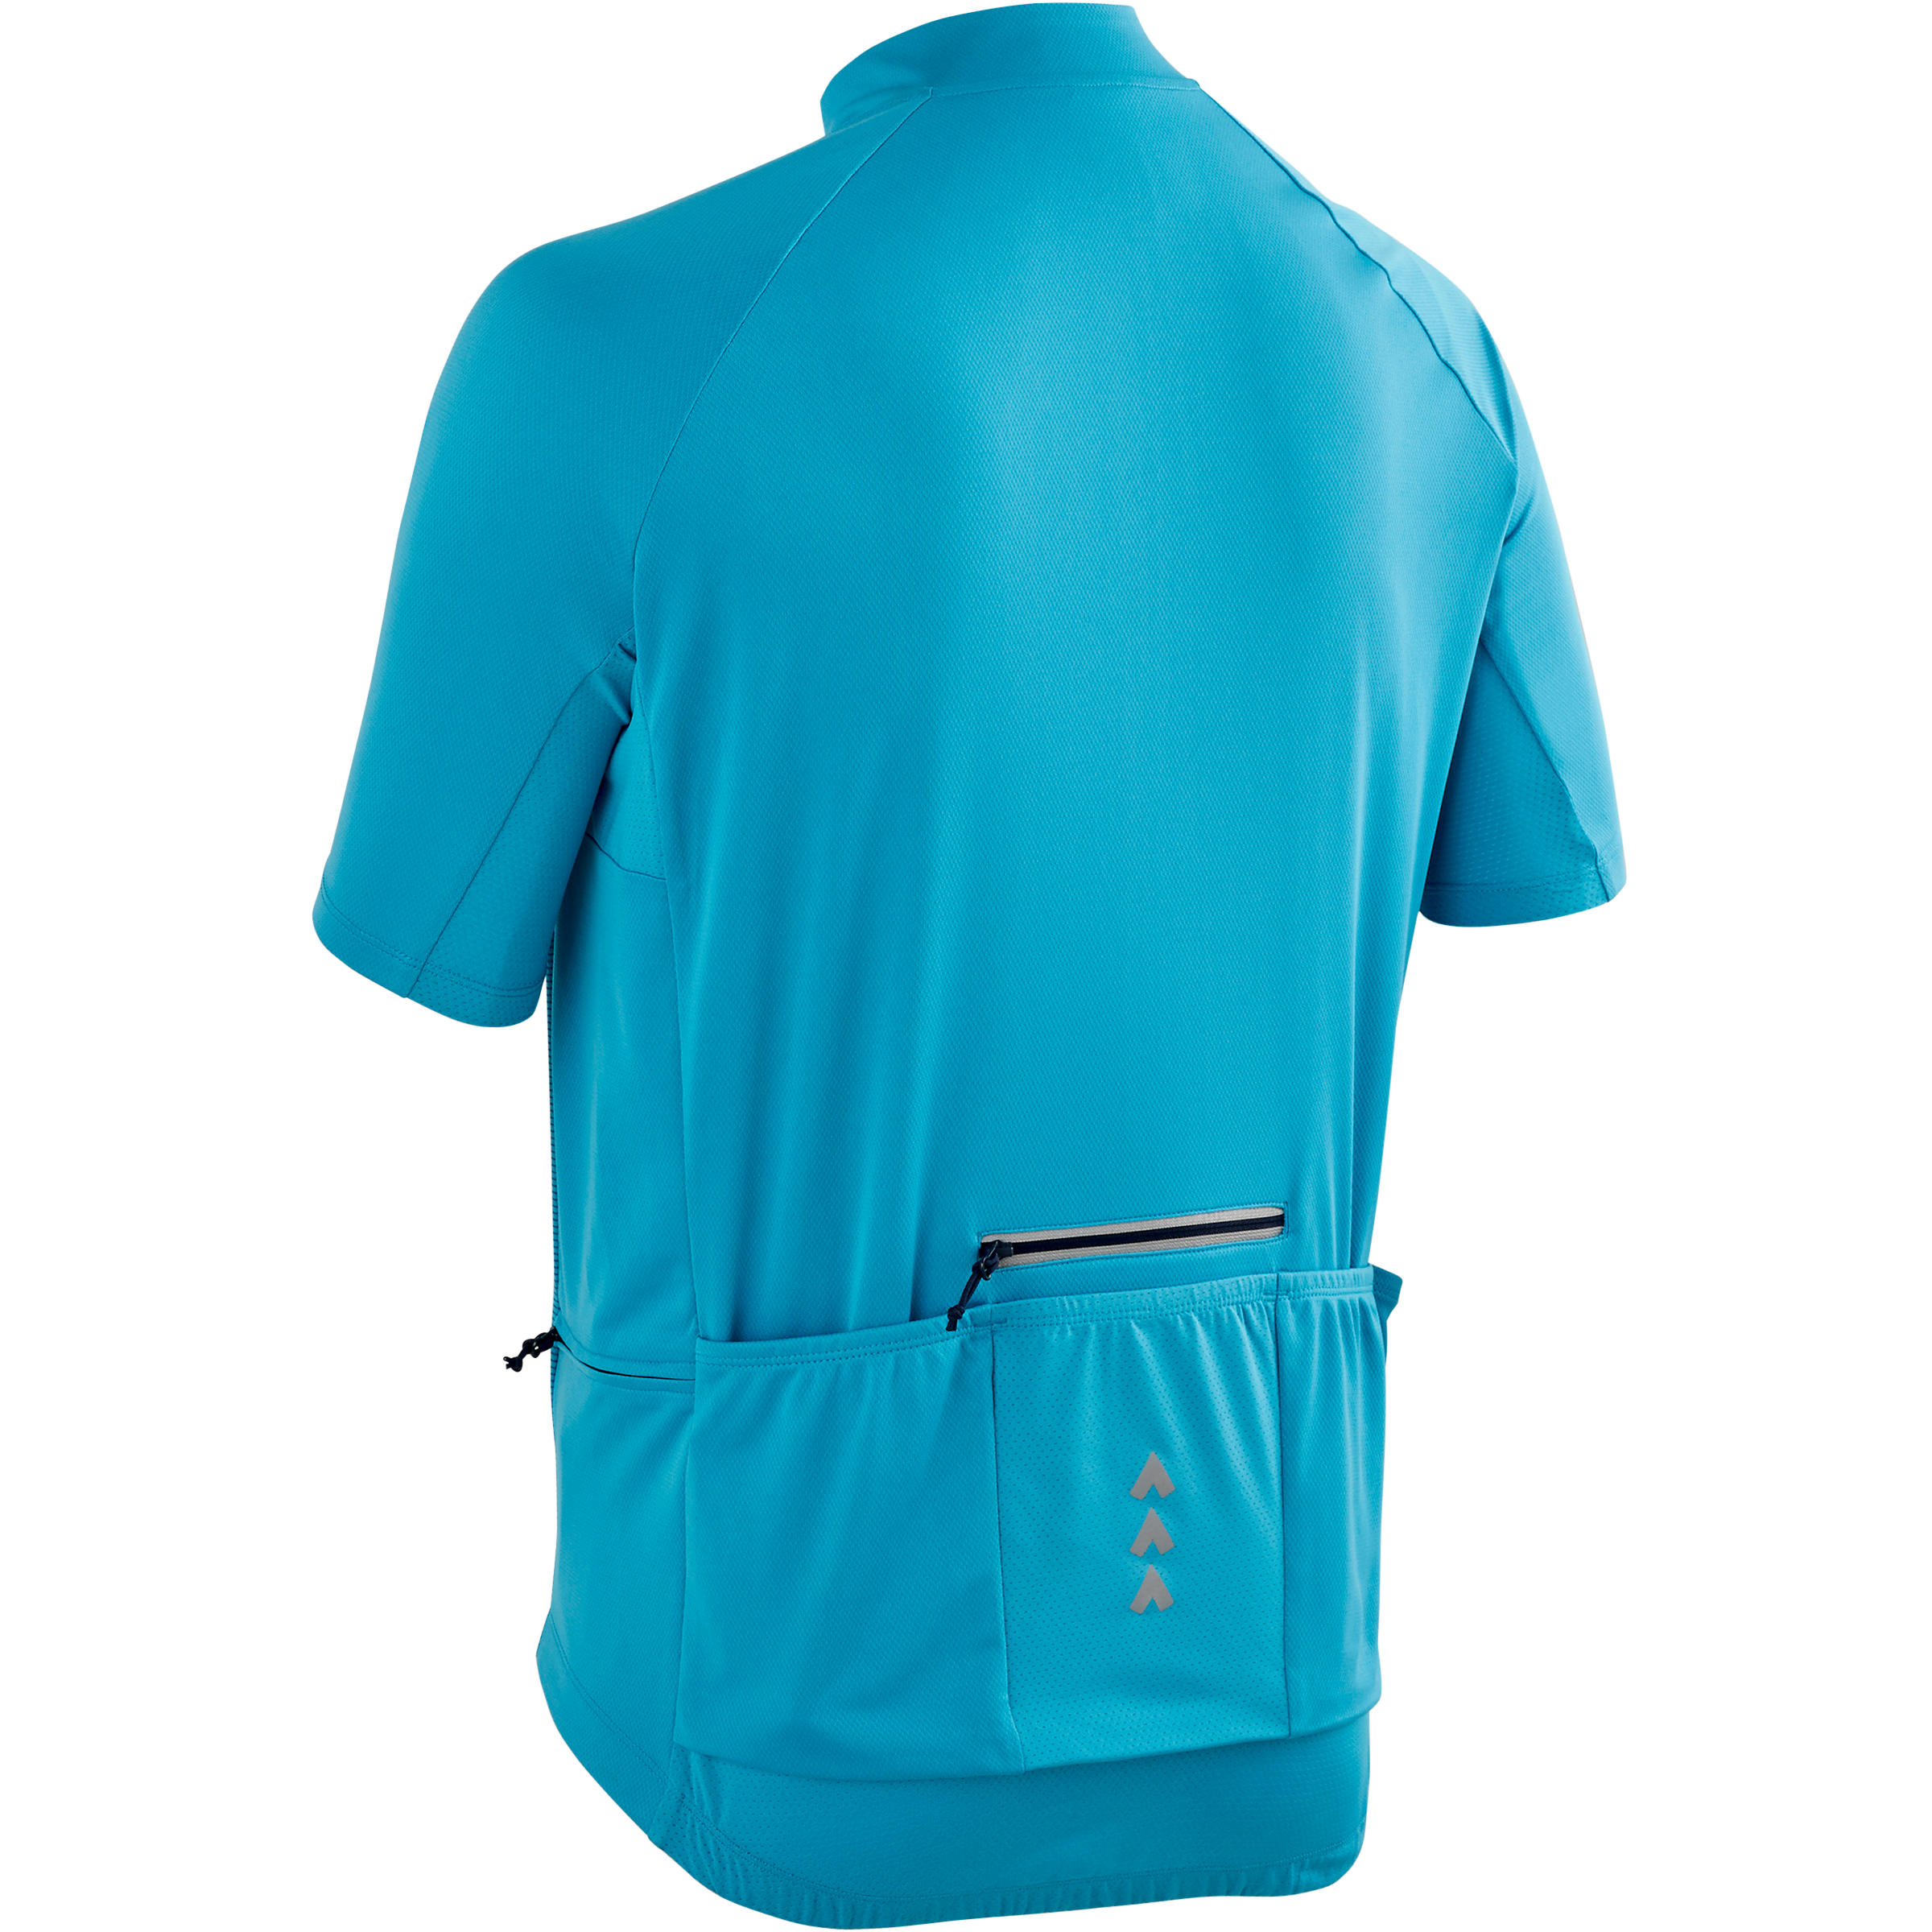 warm weather cycling jersey